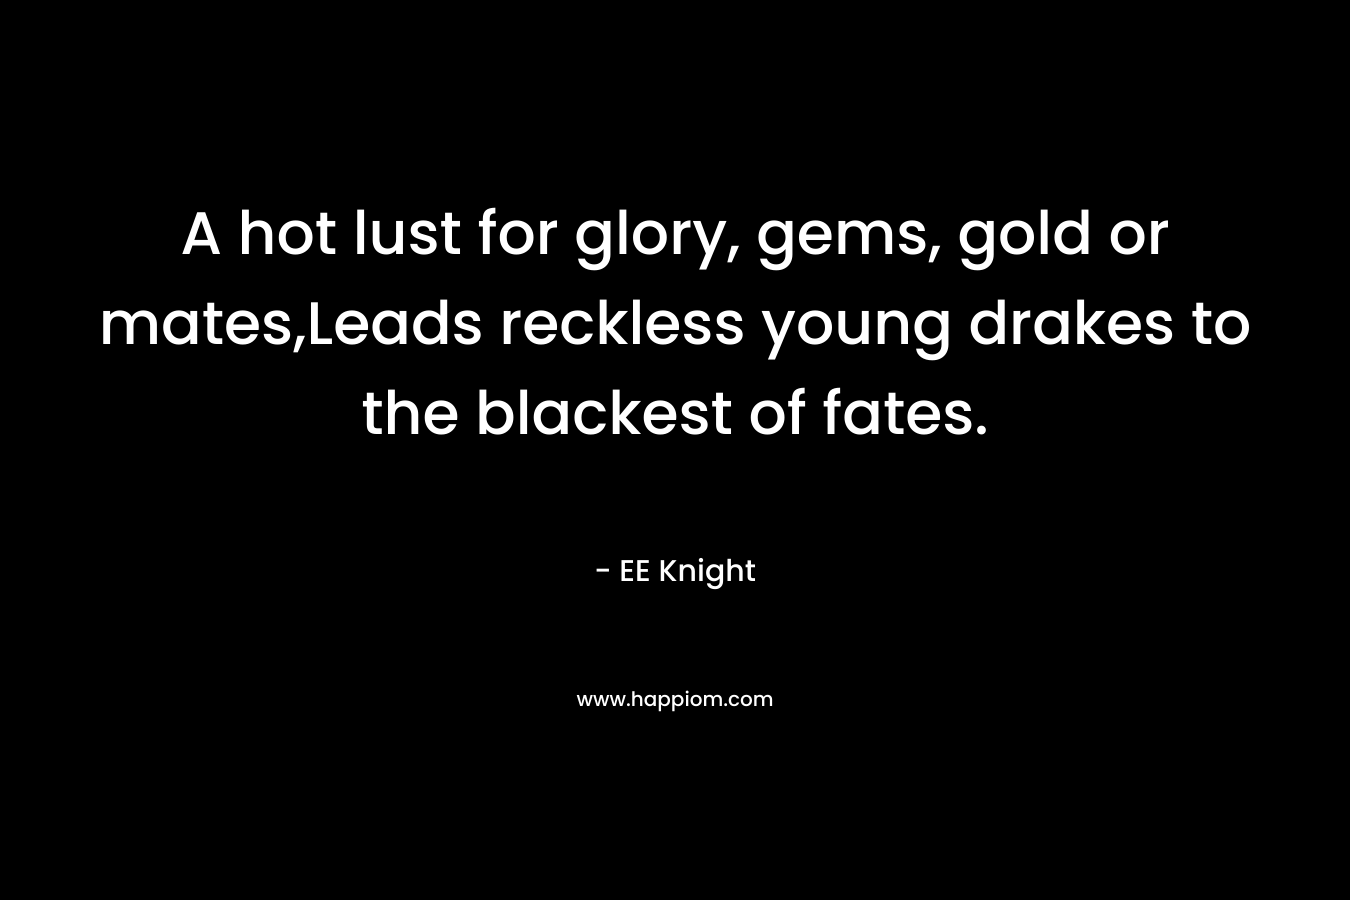 A hot lust for glory, gems, gold or mates,Leads reckless young drakes to the blackest of fates.